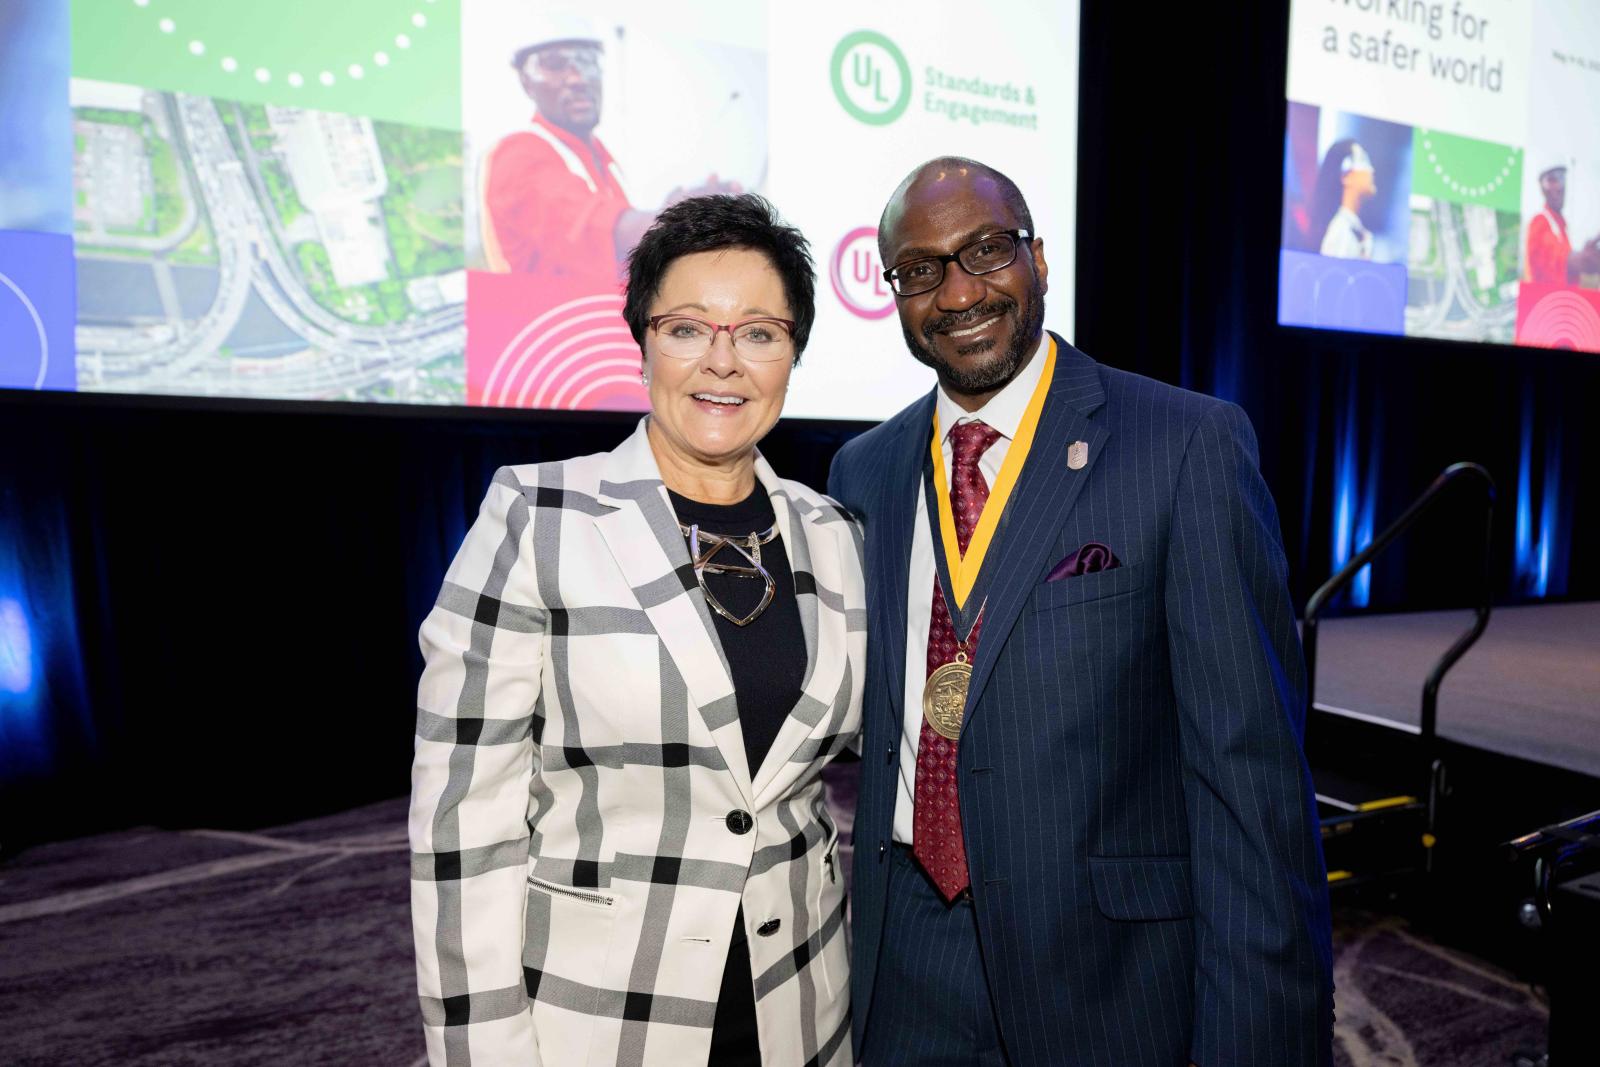 Dr. Lori Moore-Merrell (left), the U.S. Fire Administrator, gave the closing keynote presentation. She is pictured with Dwayne Sloan, director, principal engineering in UL Solution's Built Environment and chair of the fire council. 